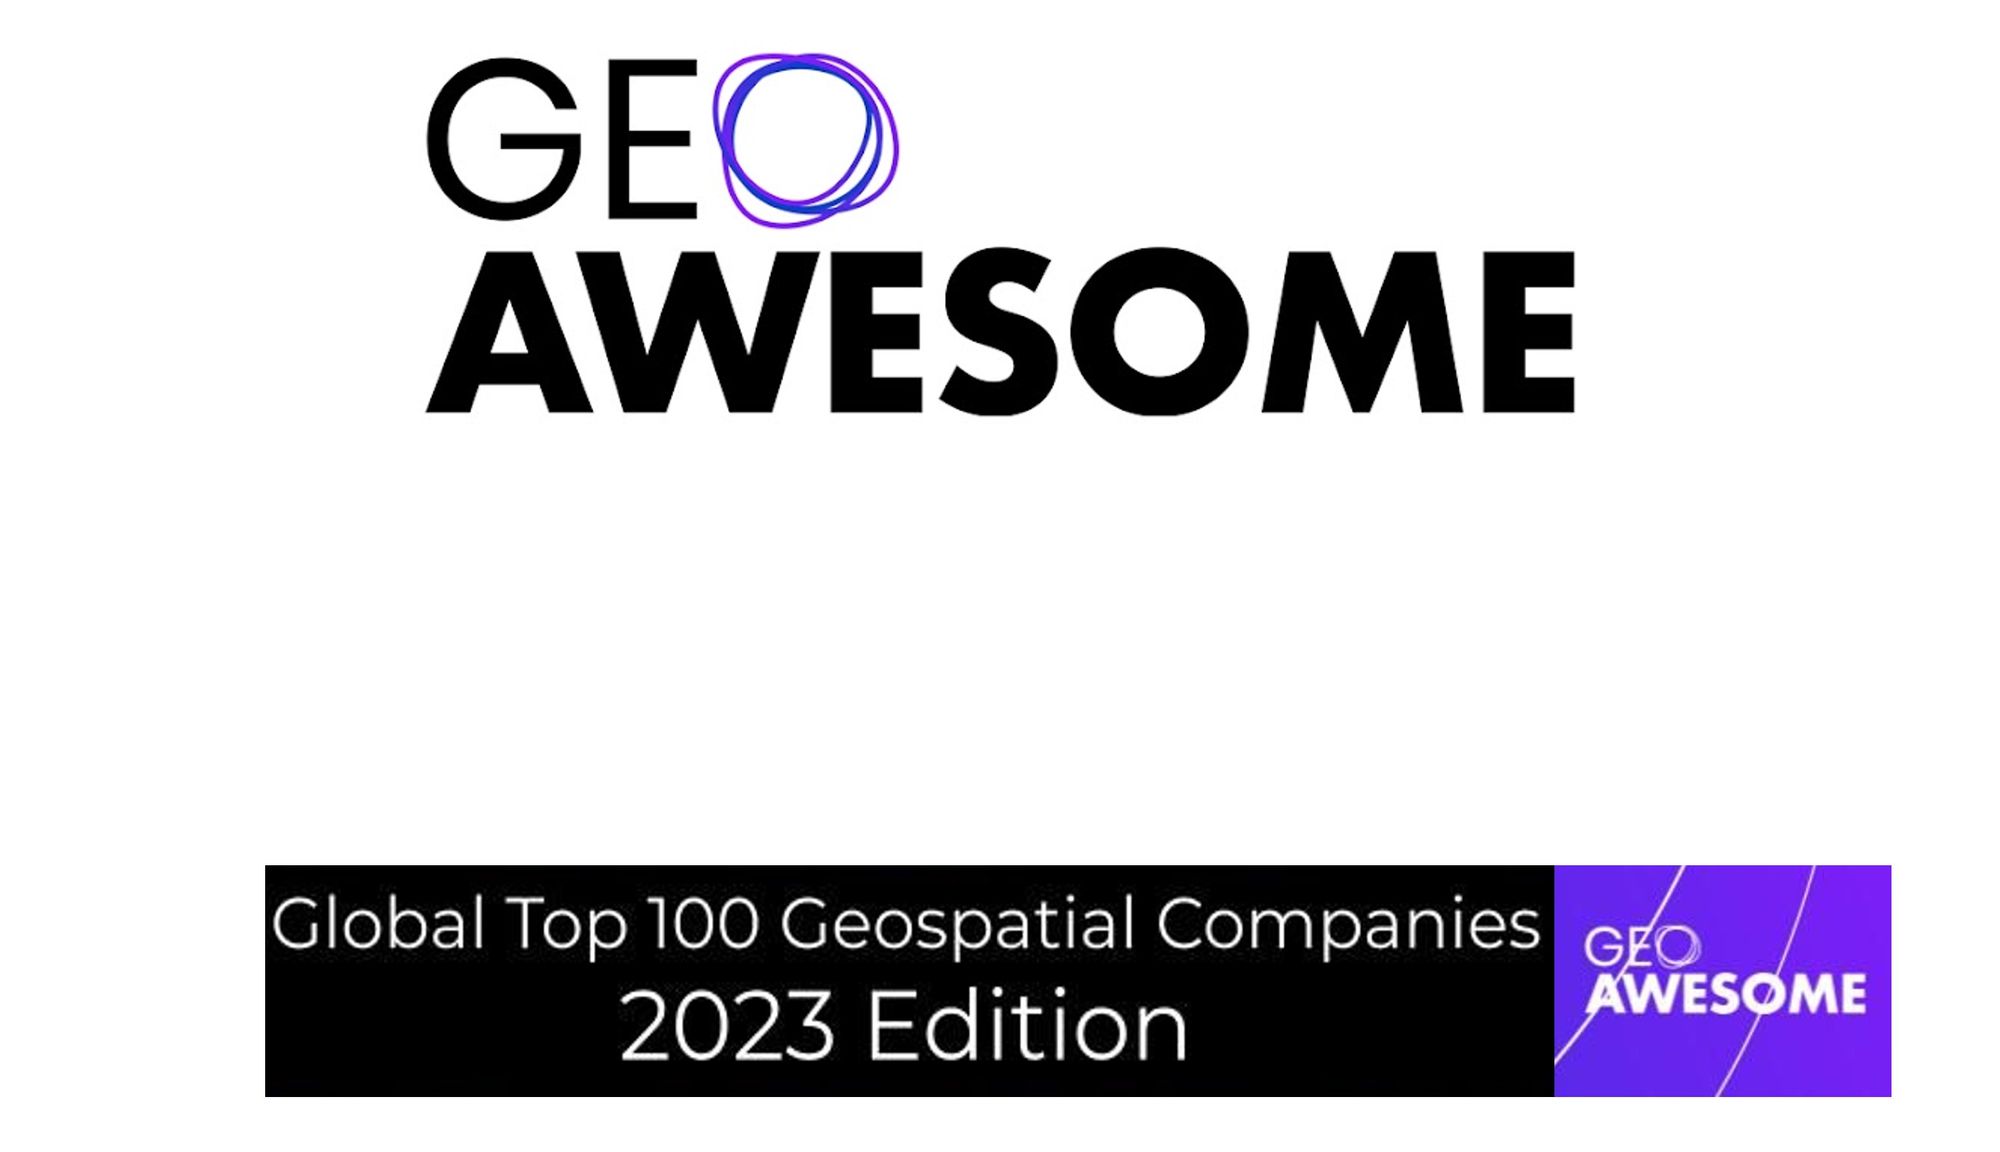 GEOLYTIX are Geoawesome - Global Top 100 Geospatial Companies